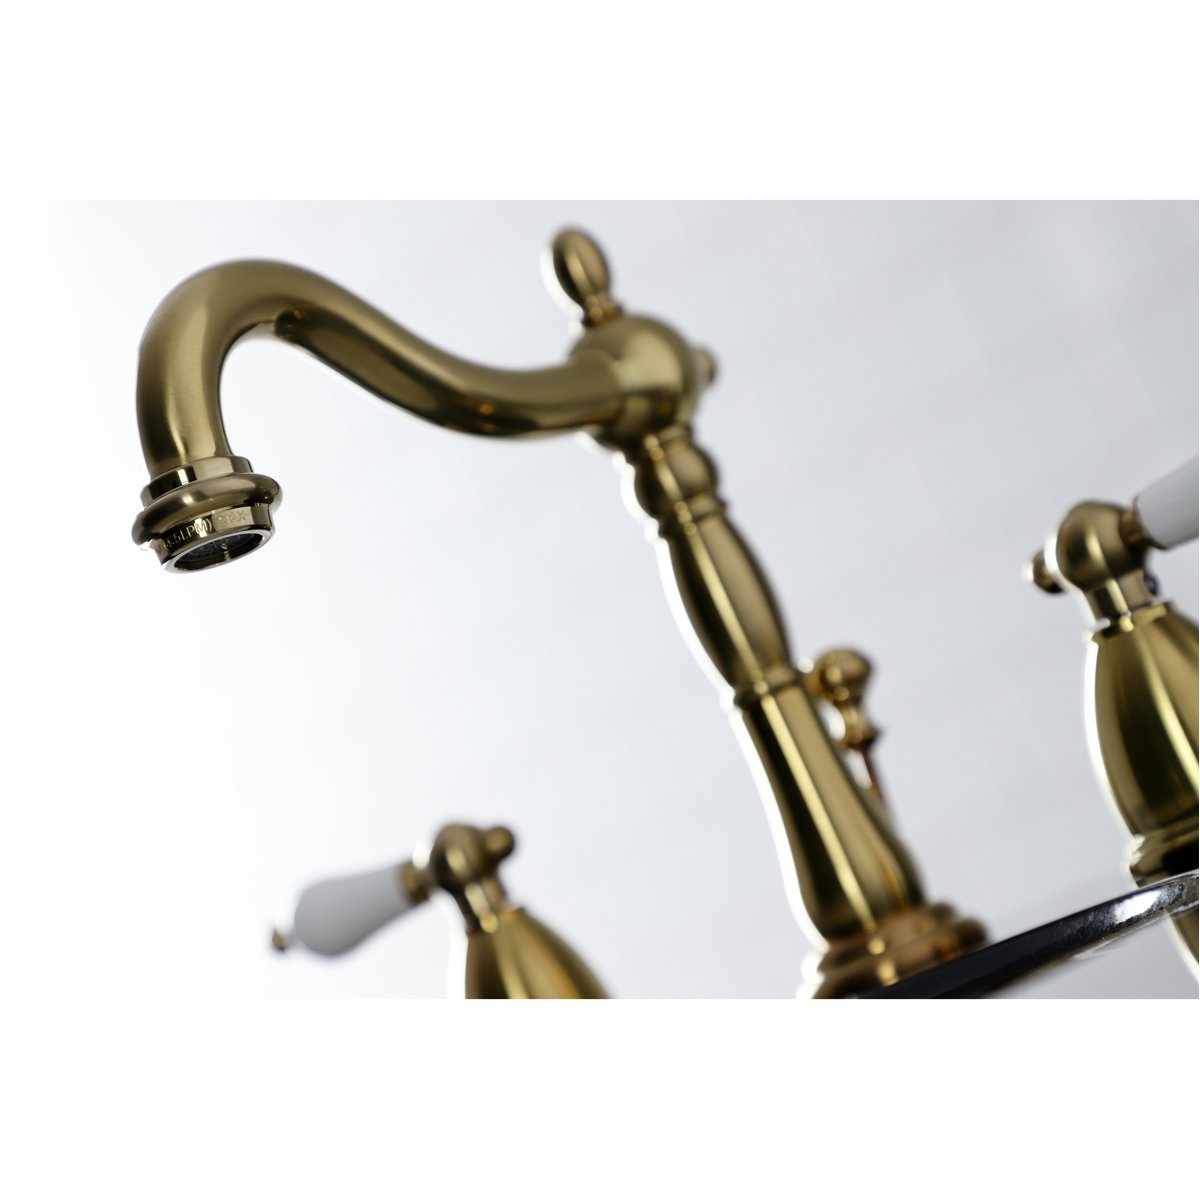 Kingston Brass Heritage 3-Hole 8-Inch Widespread Bathroom Faucet